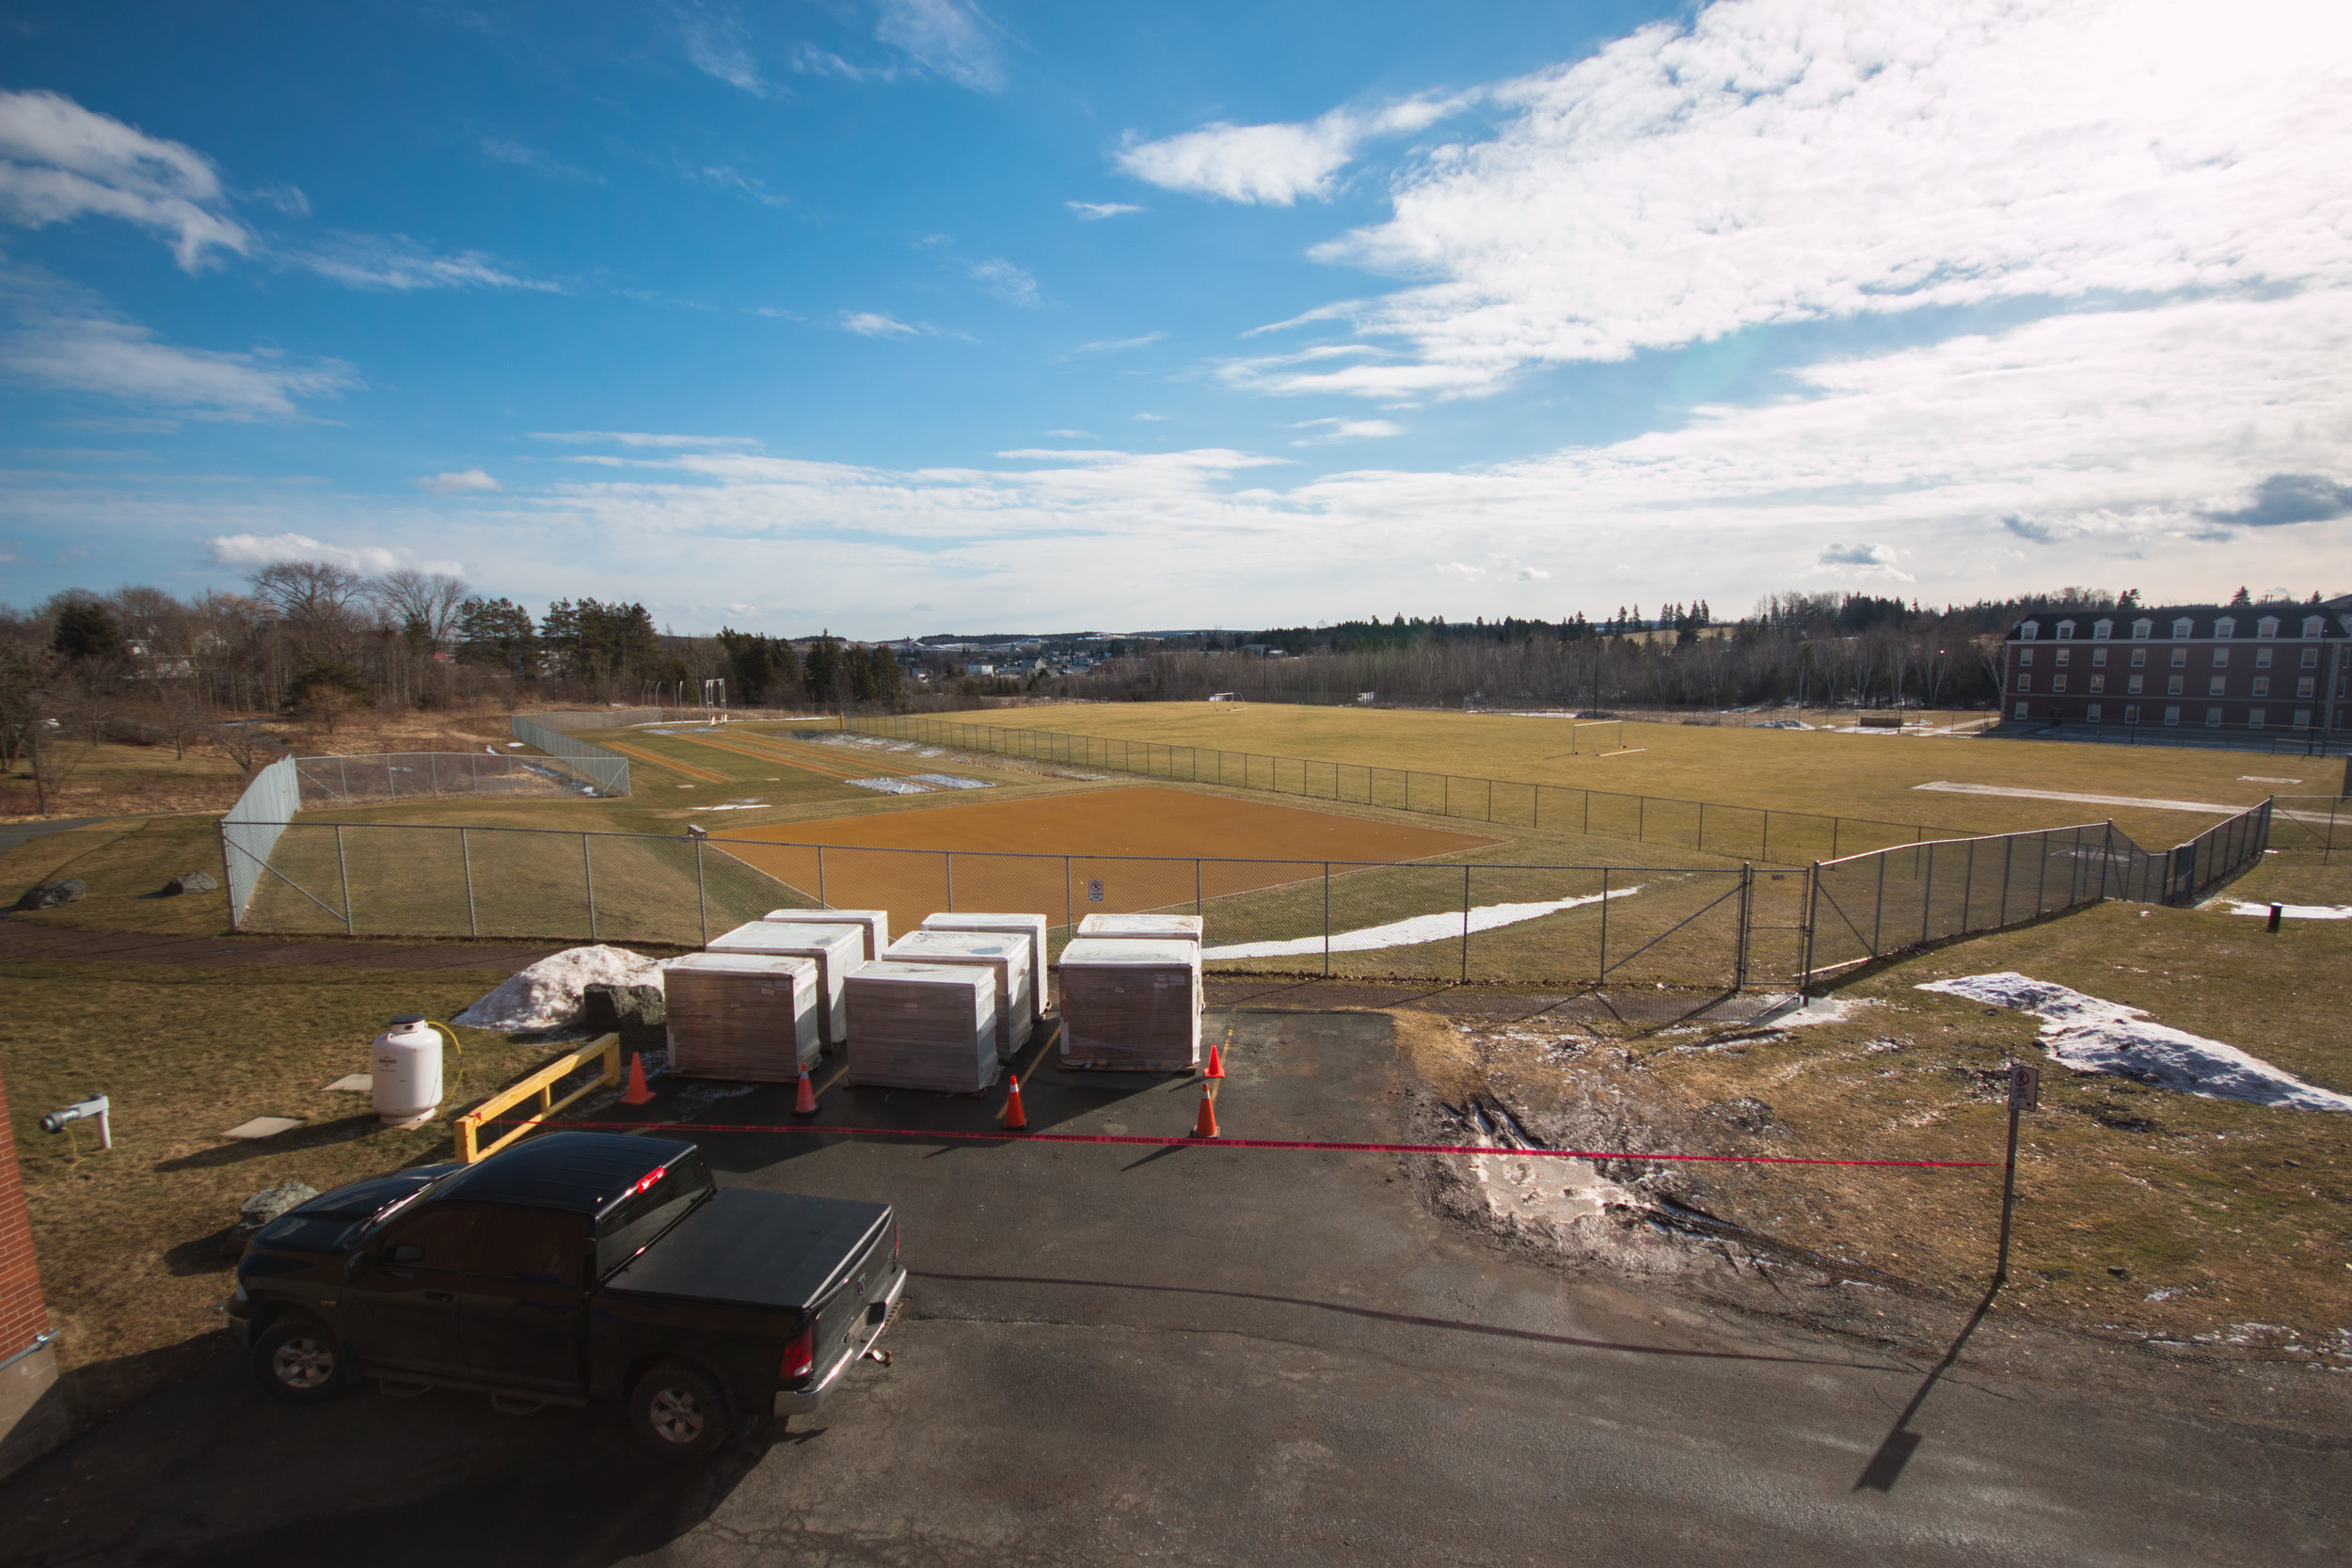  The scene overlooking the soccer and track &amp; field facilities. Prior to their installation, the area was used as field lab space.&nbsp; 